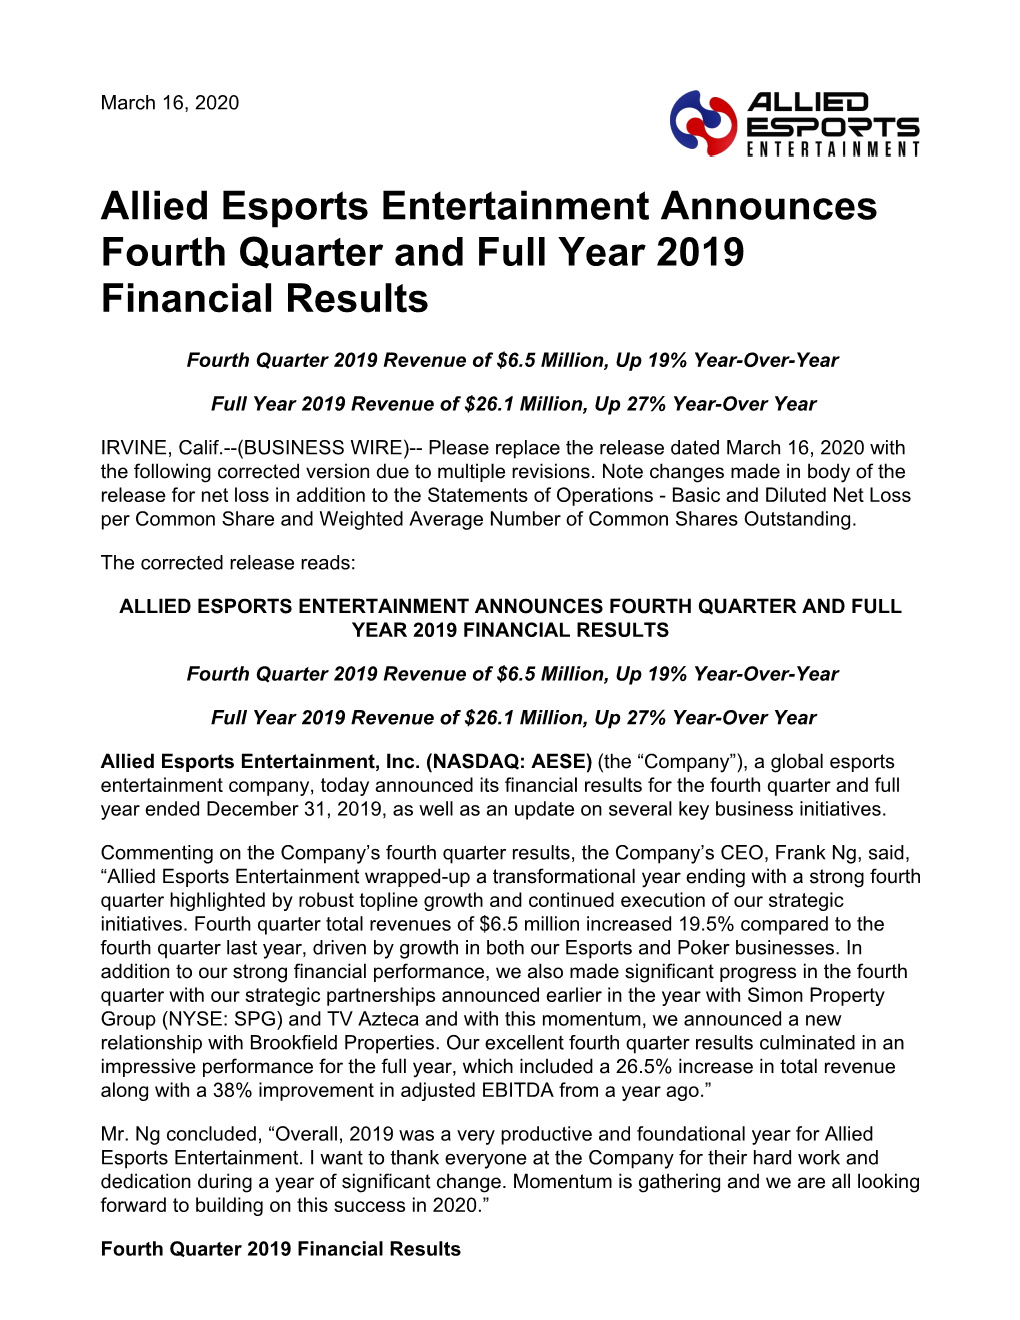 Allied Esports Entertainment Announces Fourth Quarter and Full Year 2019 Financial Results